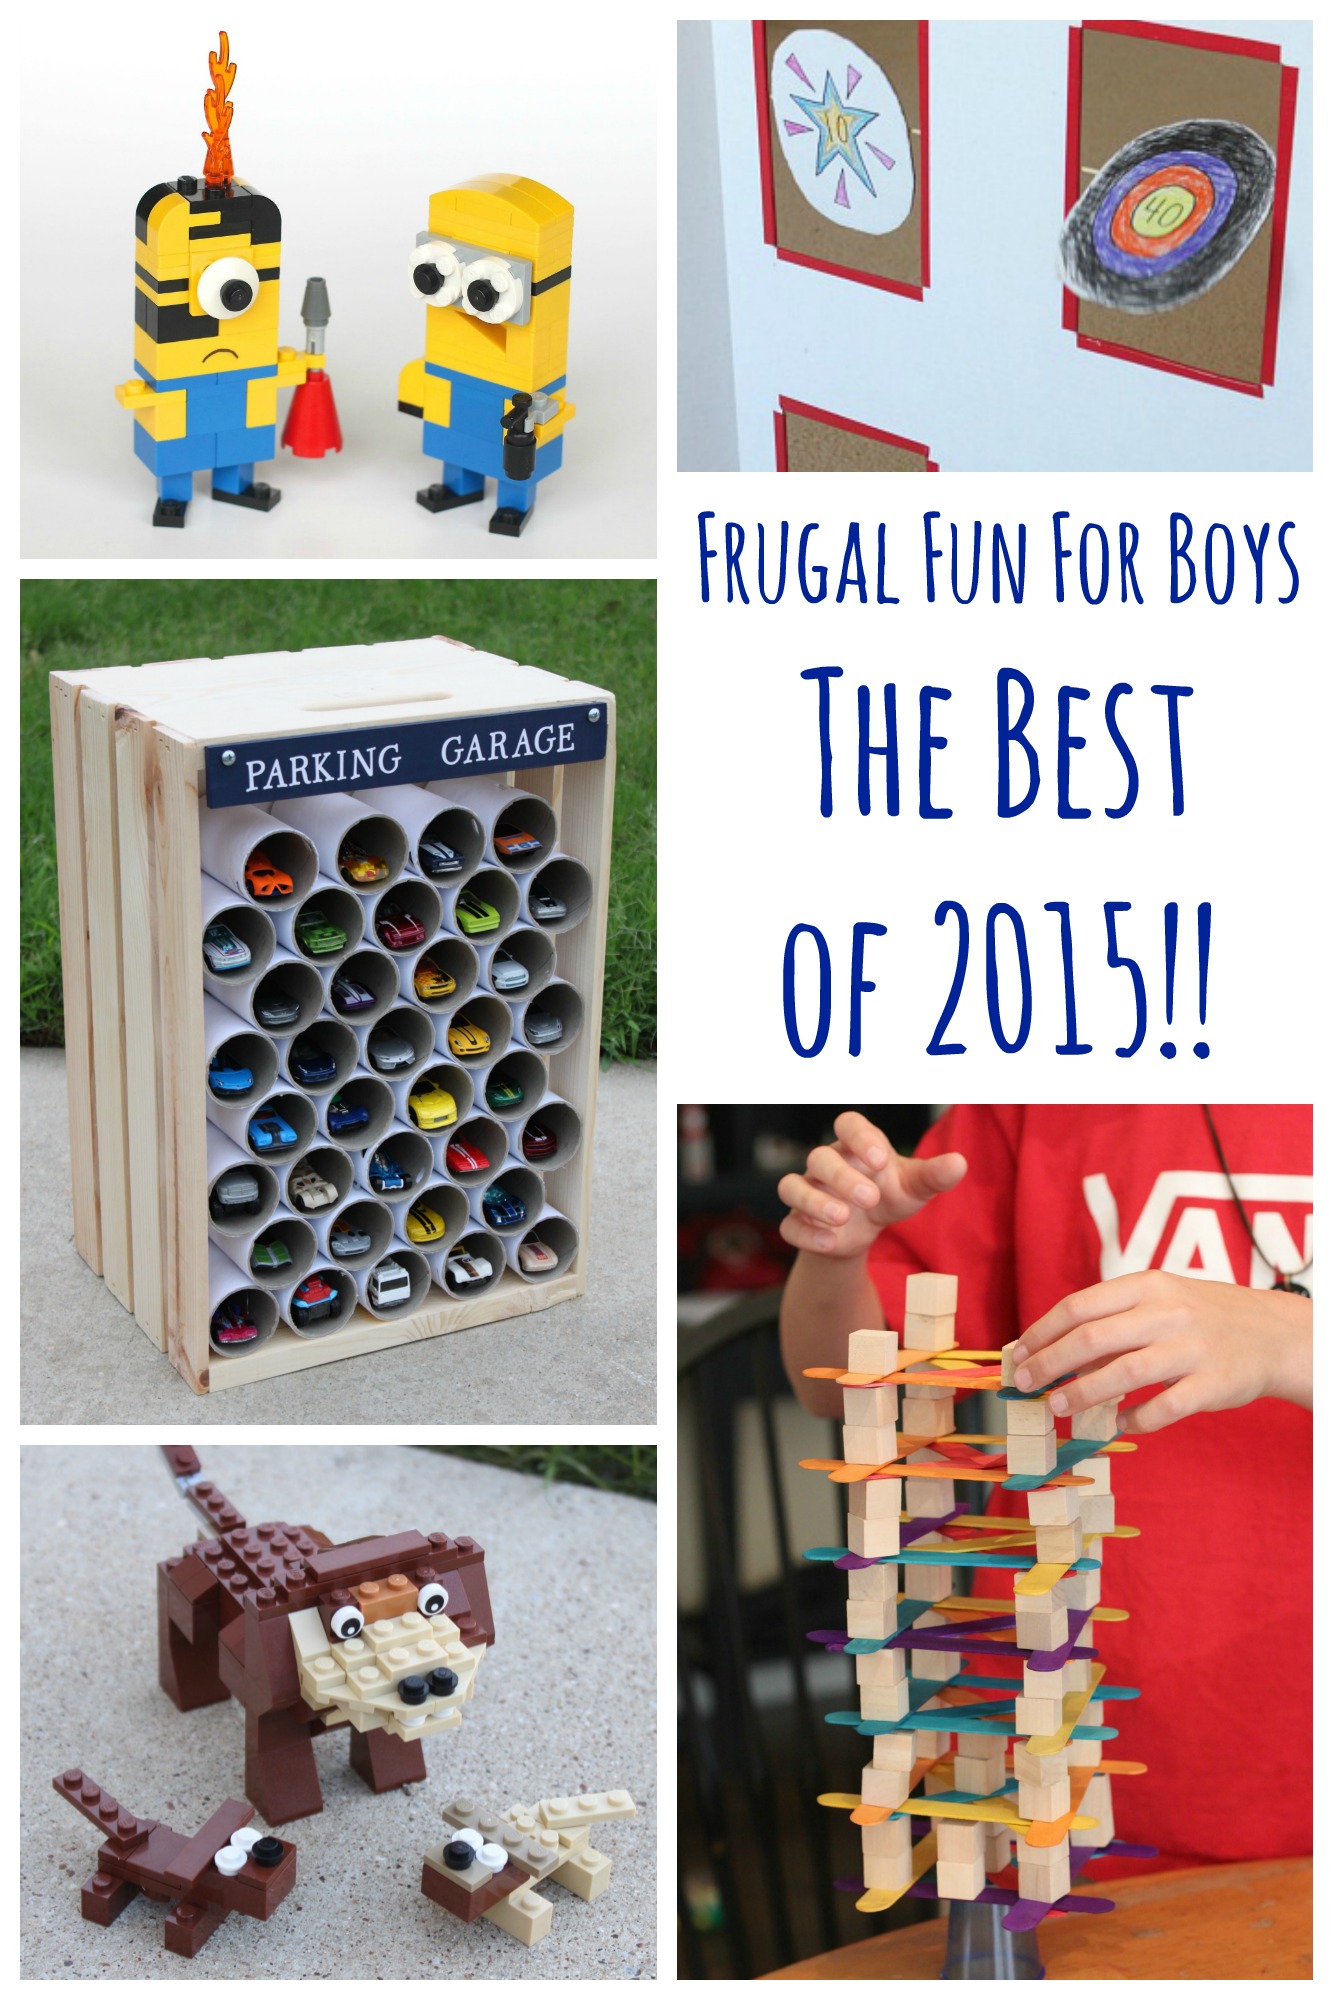 Frugal Fun for Boys - The Top 15 Posts of 2015